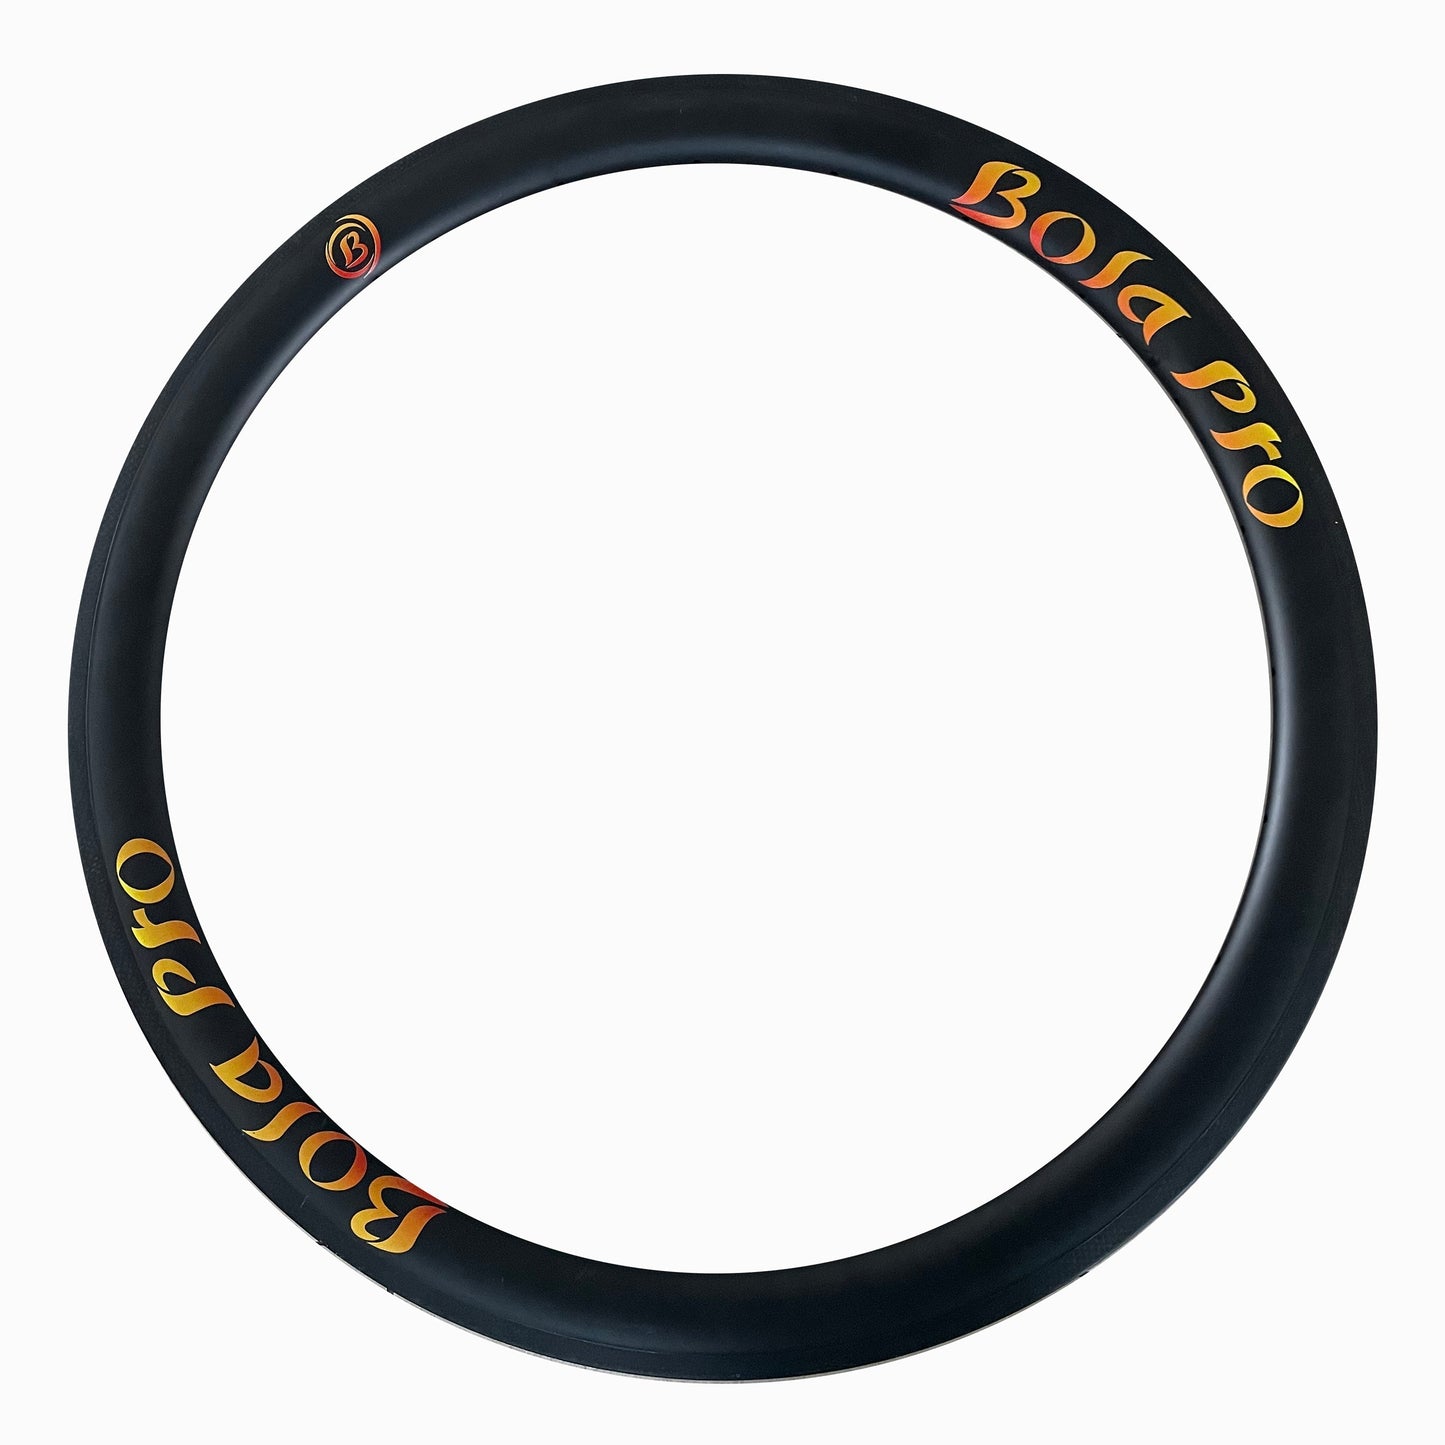 Tubeless  carbon rims 45mm profile  27mm wide for Disc Brake